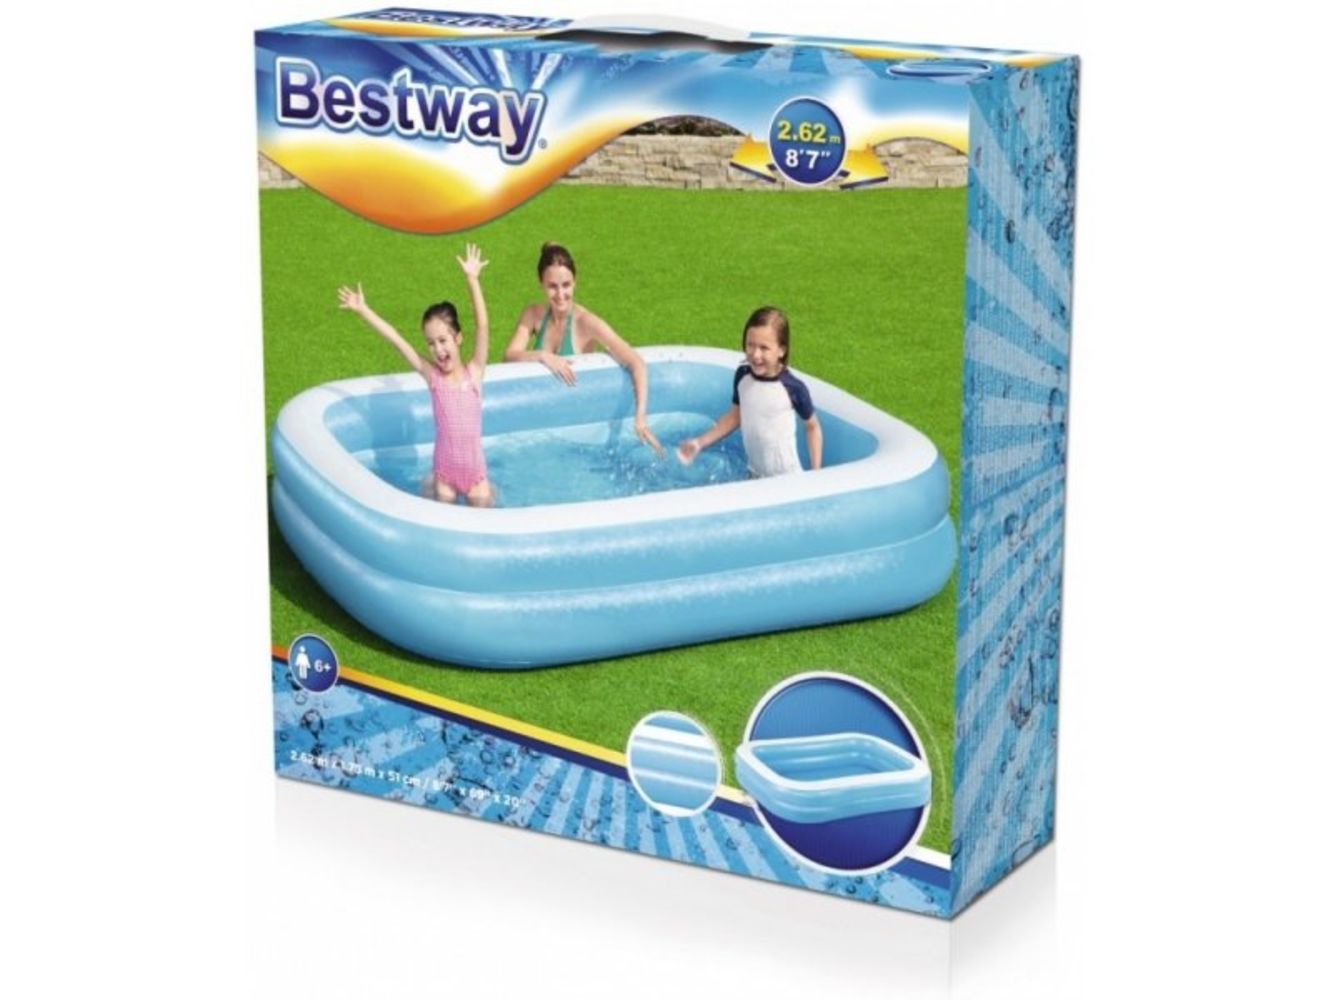 Massive End Of Season Liquidation Of Brand New Bestway Pools - Two Sizes - Over 6500 Units To Be Sold - **Amazon No. 1 Bestseller!!**